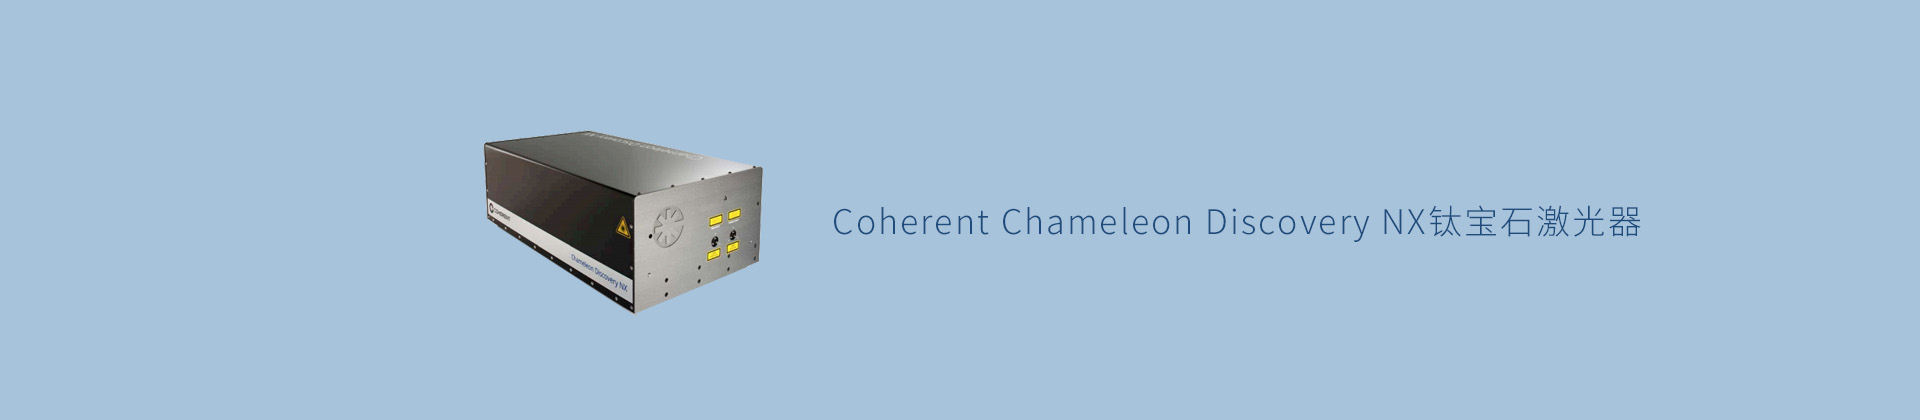 Coherent Chameleon Discovery NX钛宝石激光器